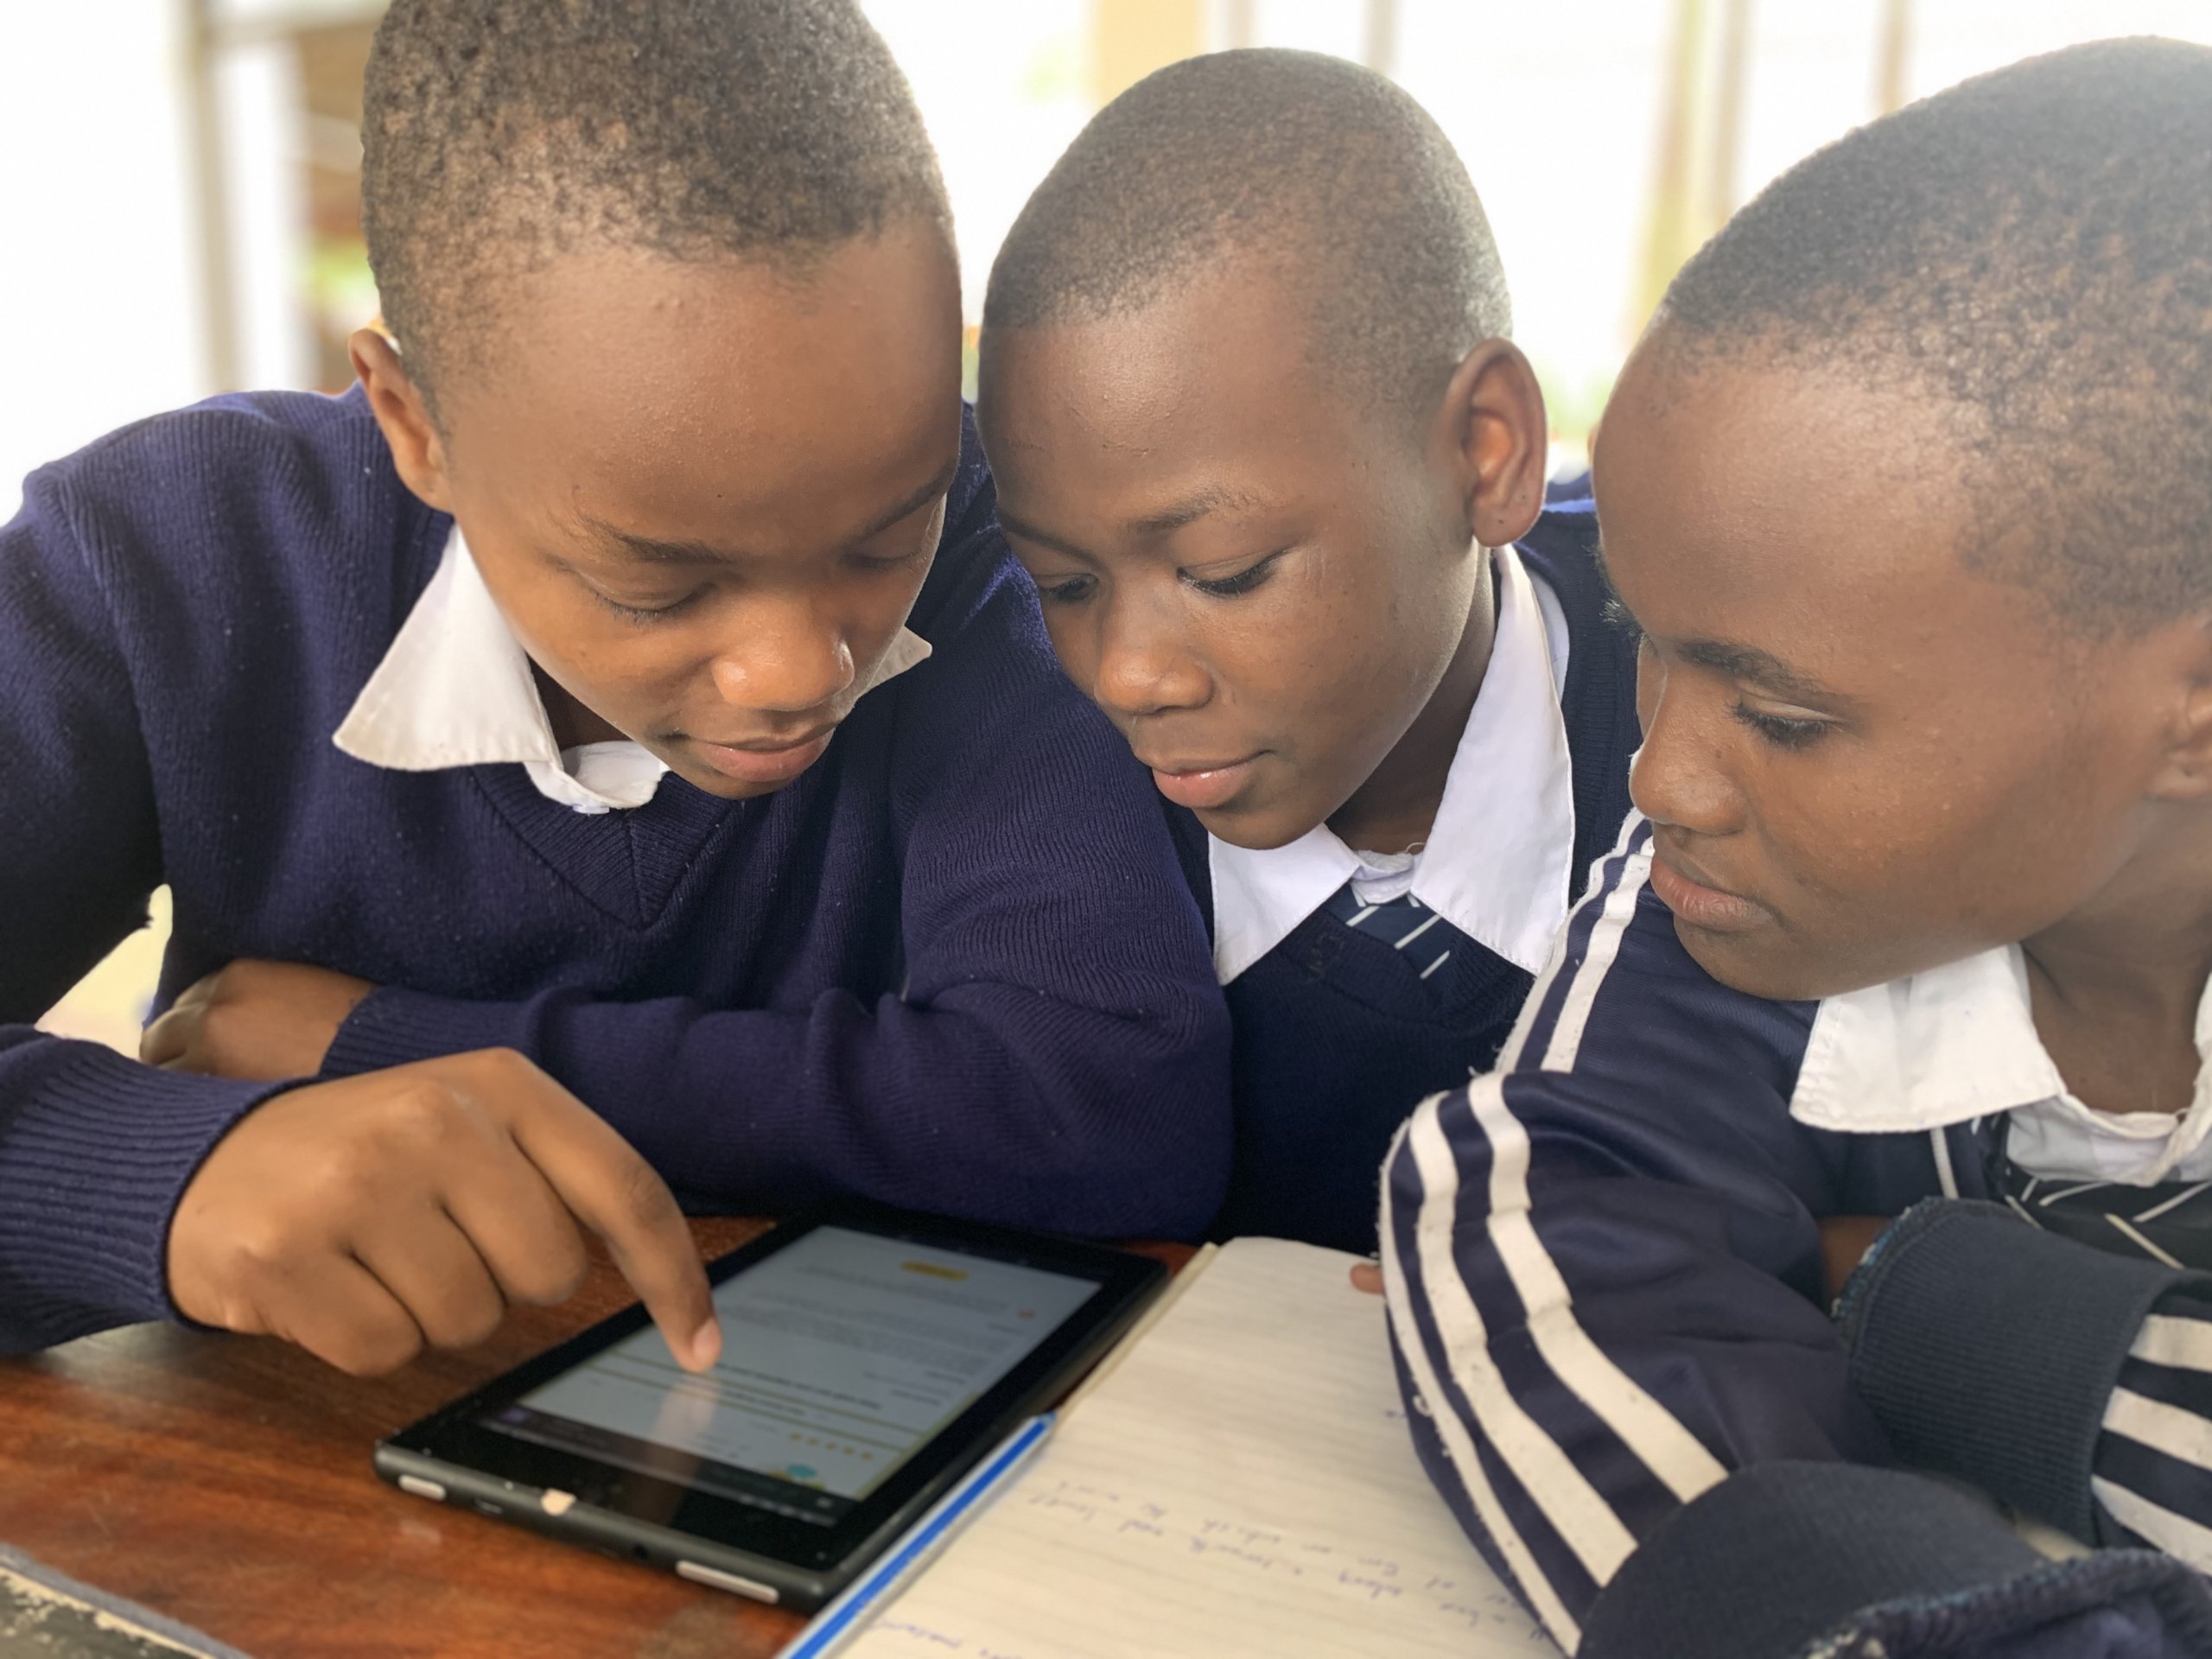 Three students gather around a tablet to read what's on the screen. The student on the left hand side points to something on the screen with his index finger.